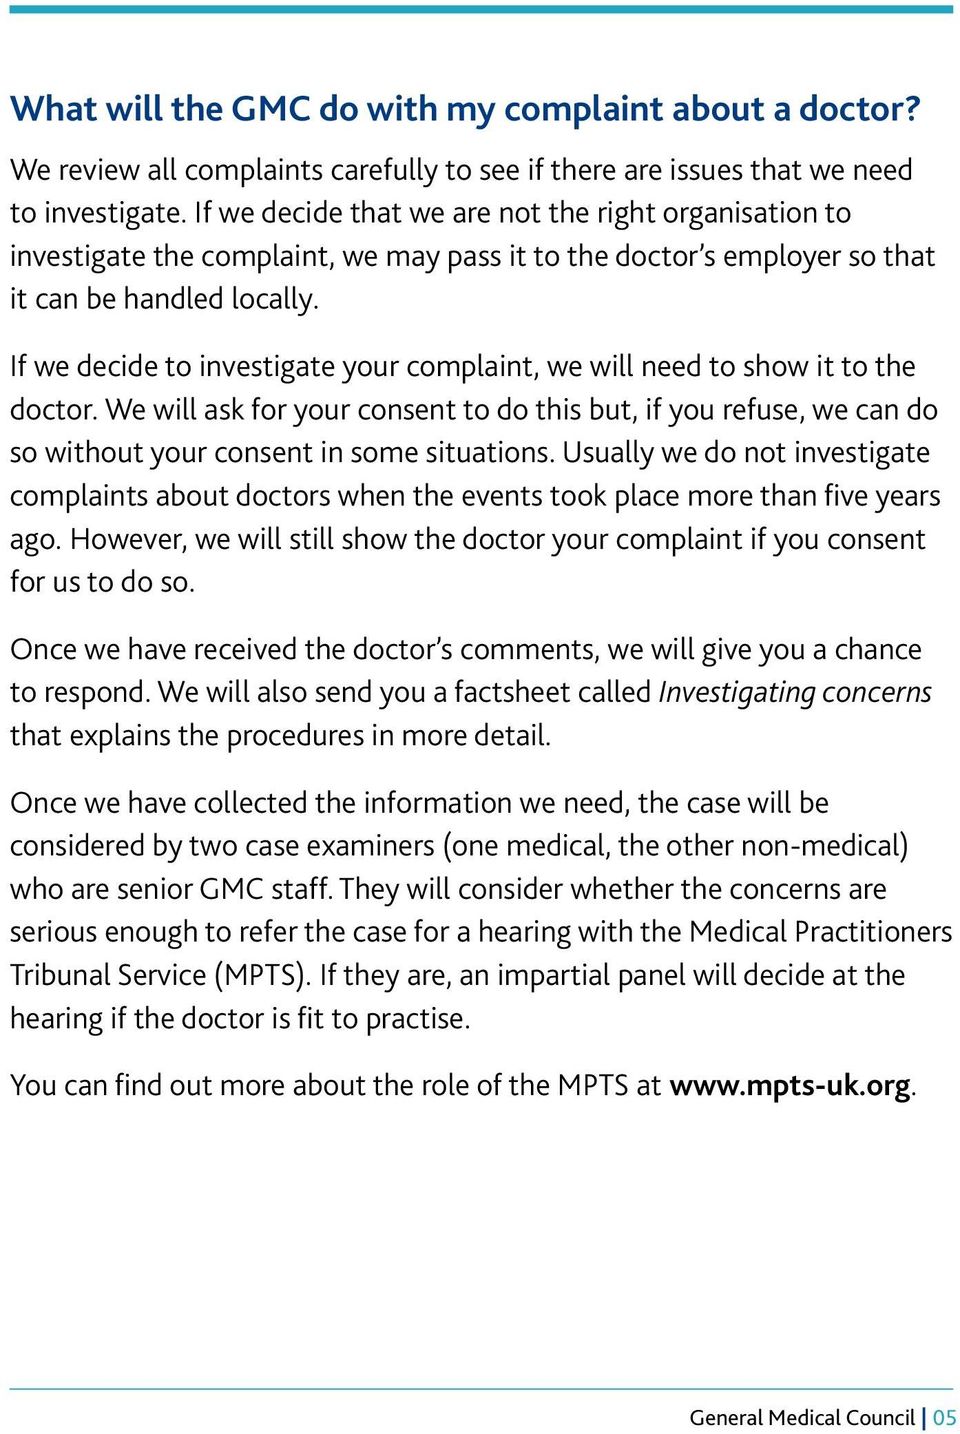 If we decide to investigate your complaint, we will need to show it to the doctor. We will ask for your consent to do this but, if you refuse, we can do so without your consent in some situations.